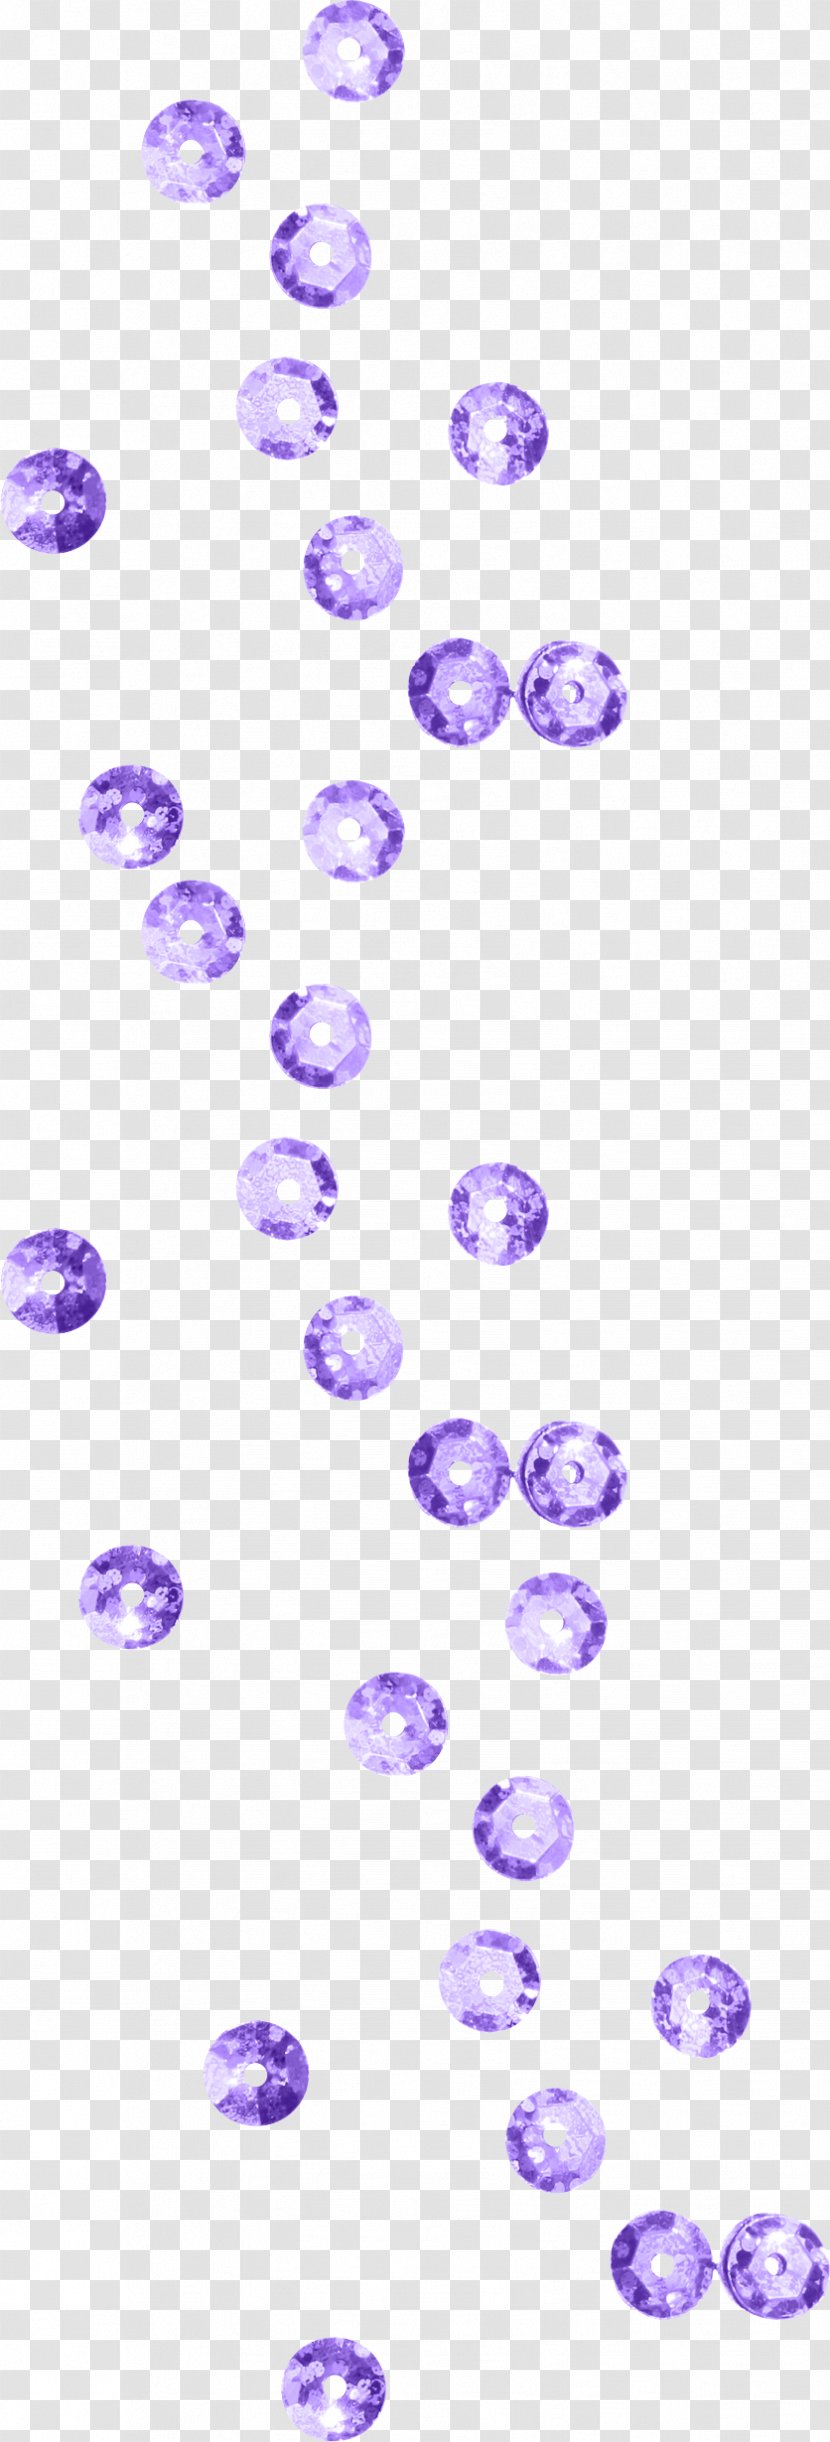 Purple Crystal Button - Floating Buttons Transparent PNG